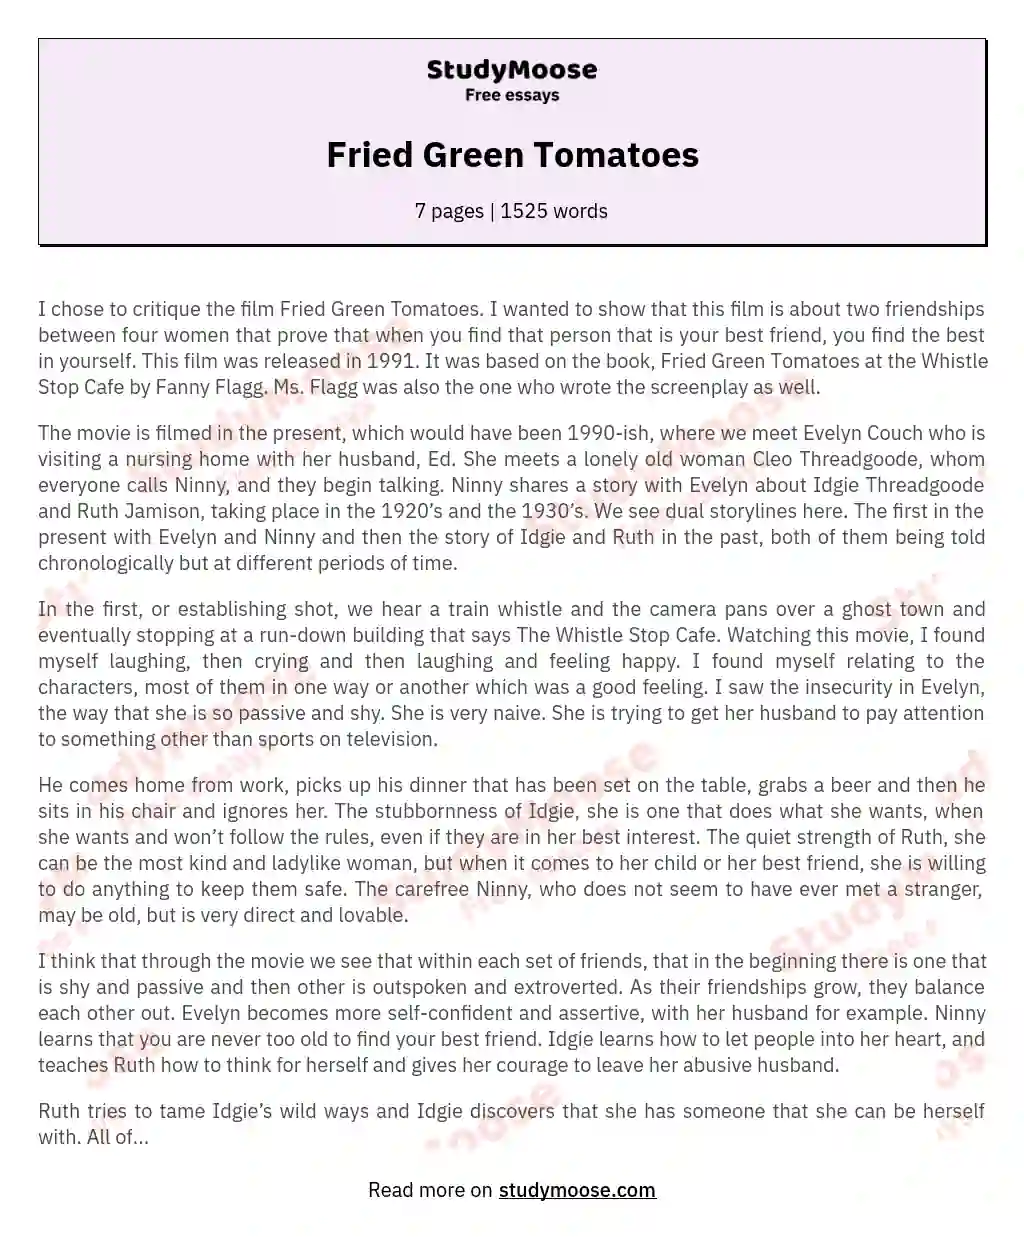 Fried Green Tomatoes essay